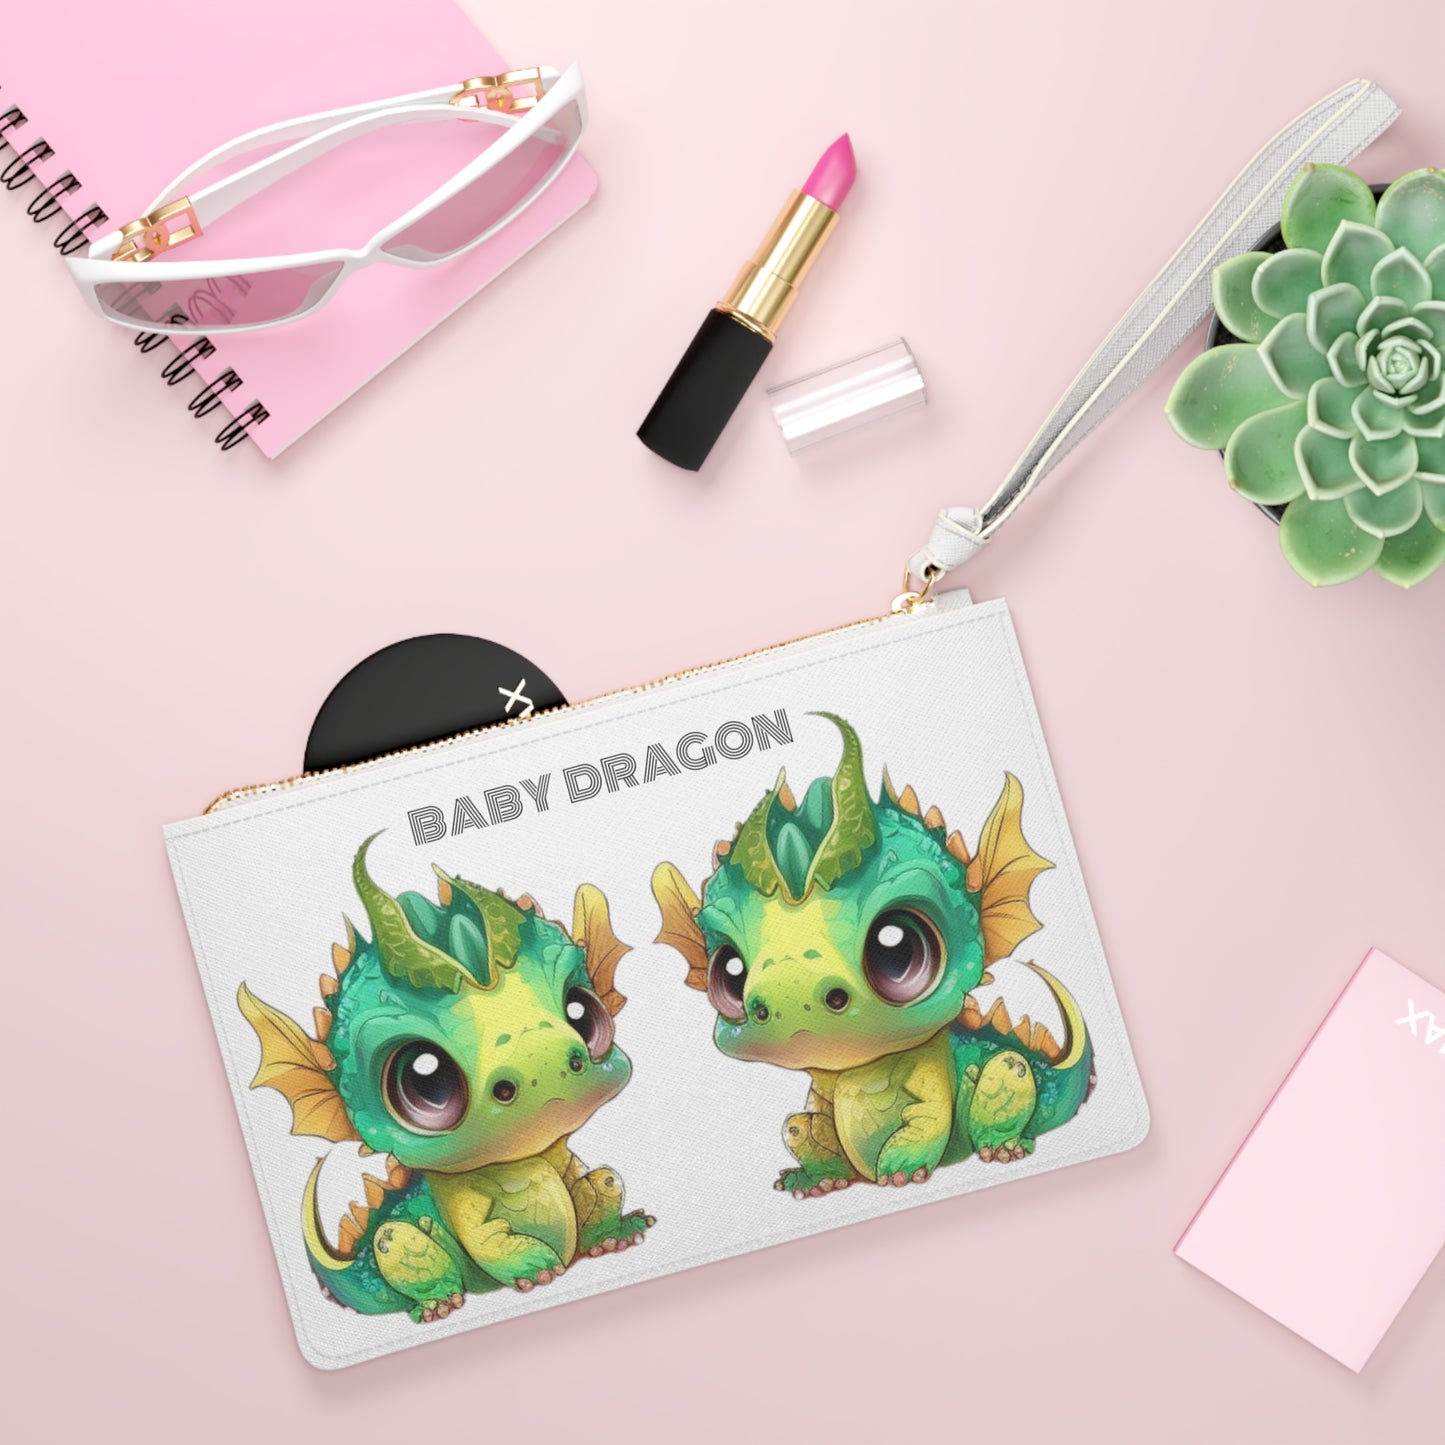 Baby Dragon is the decorative text above 2 darling baby Bobby dragons facing each other - Bobby is in greens and yellows with a little green horn popping out of his cute head - on a white vegan leather sofino patterned clutch bag with a loop white handle and gold zipper - excellent quality! On the other side of the clutch little Bobby dragons are all over it an inch apart.